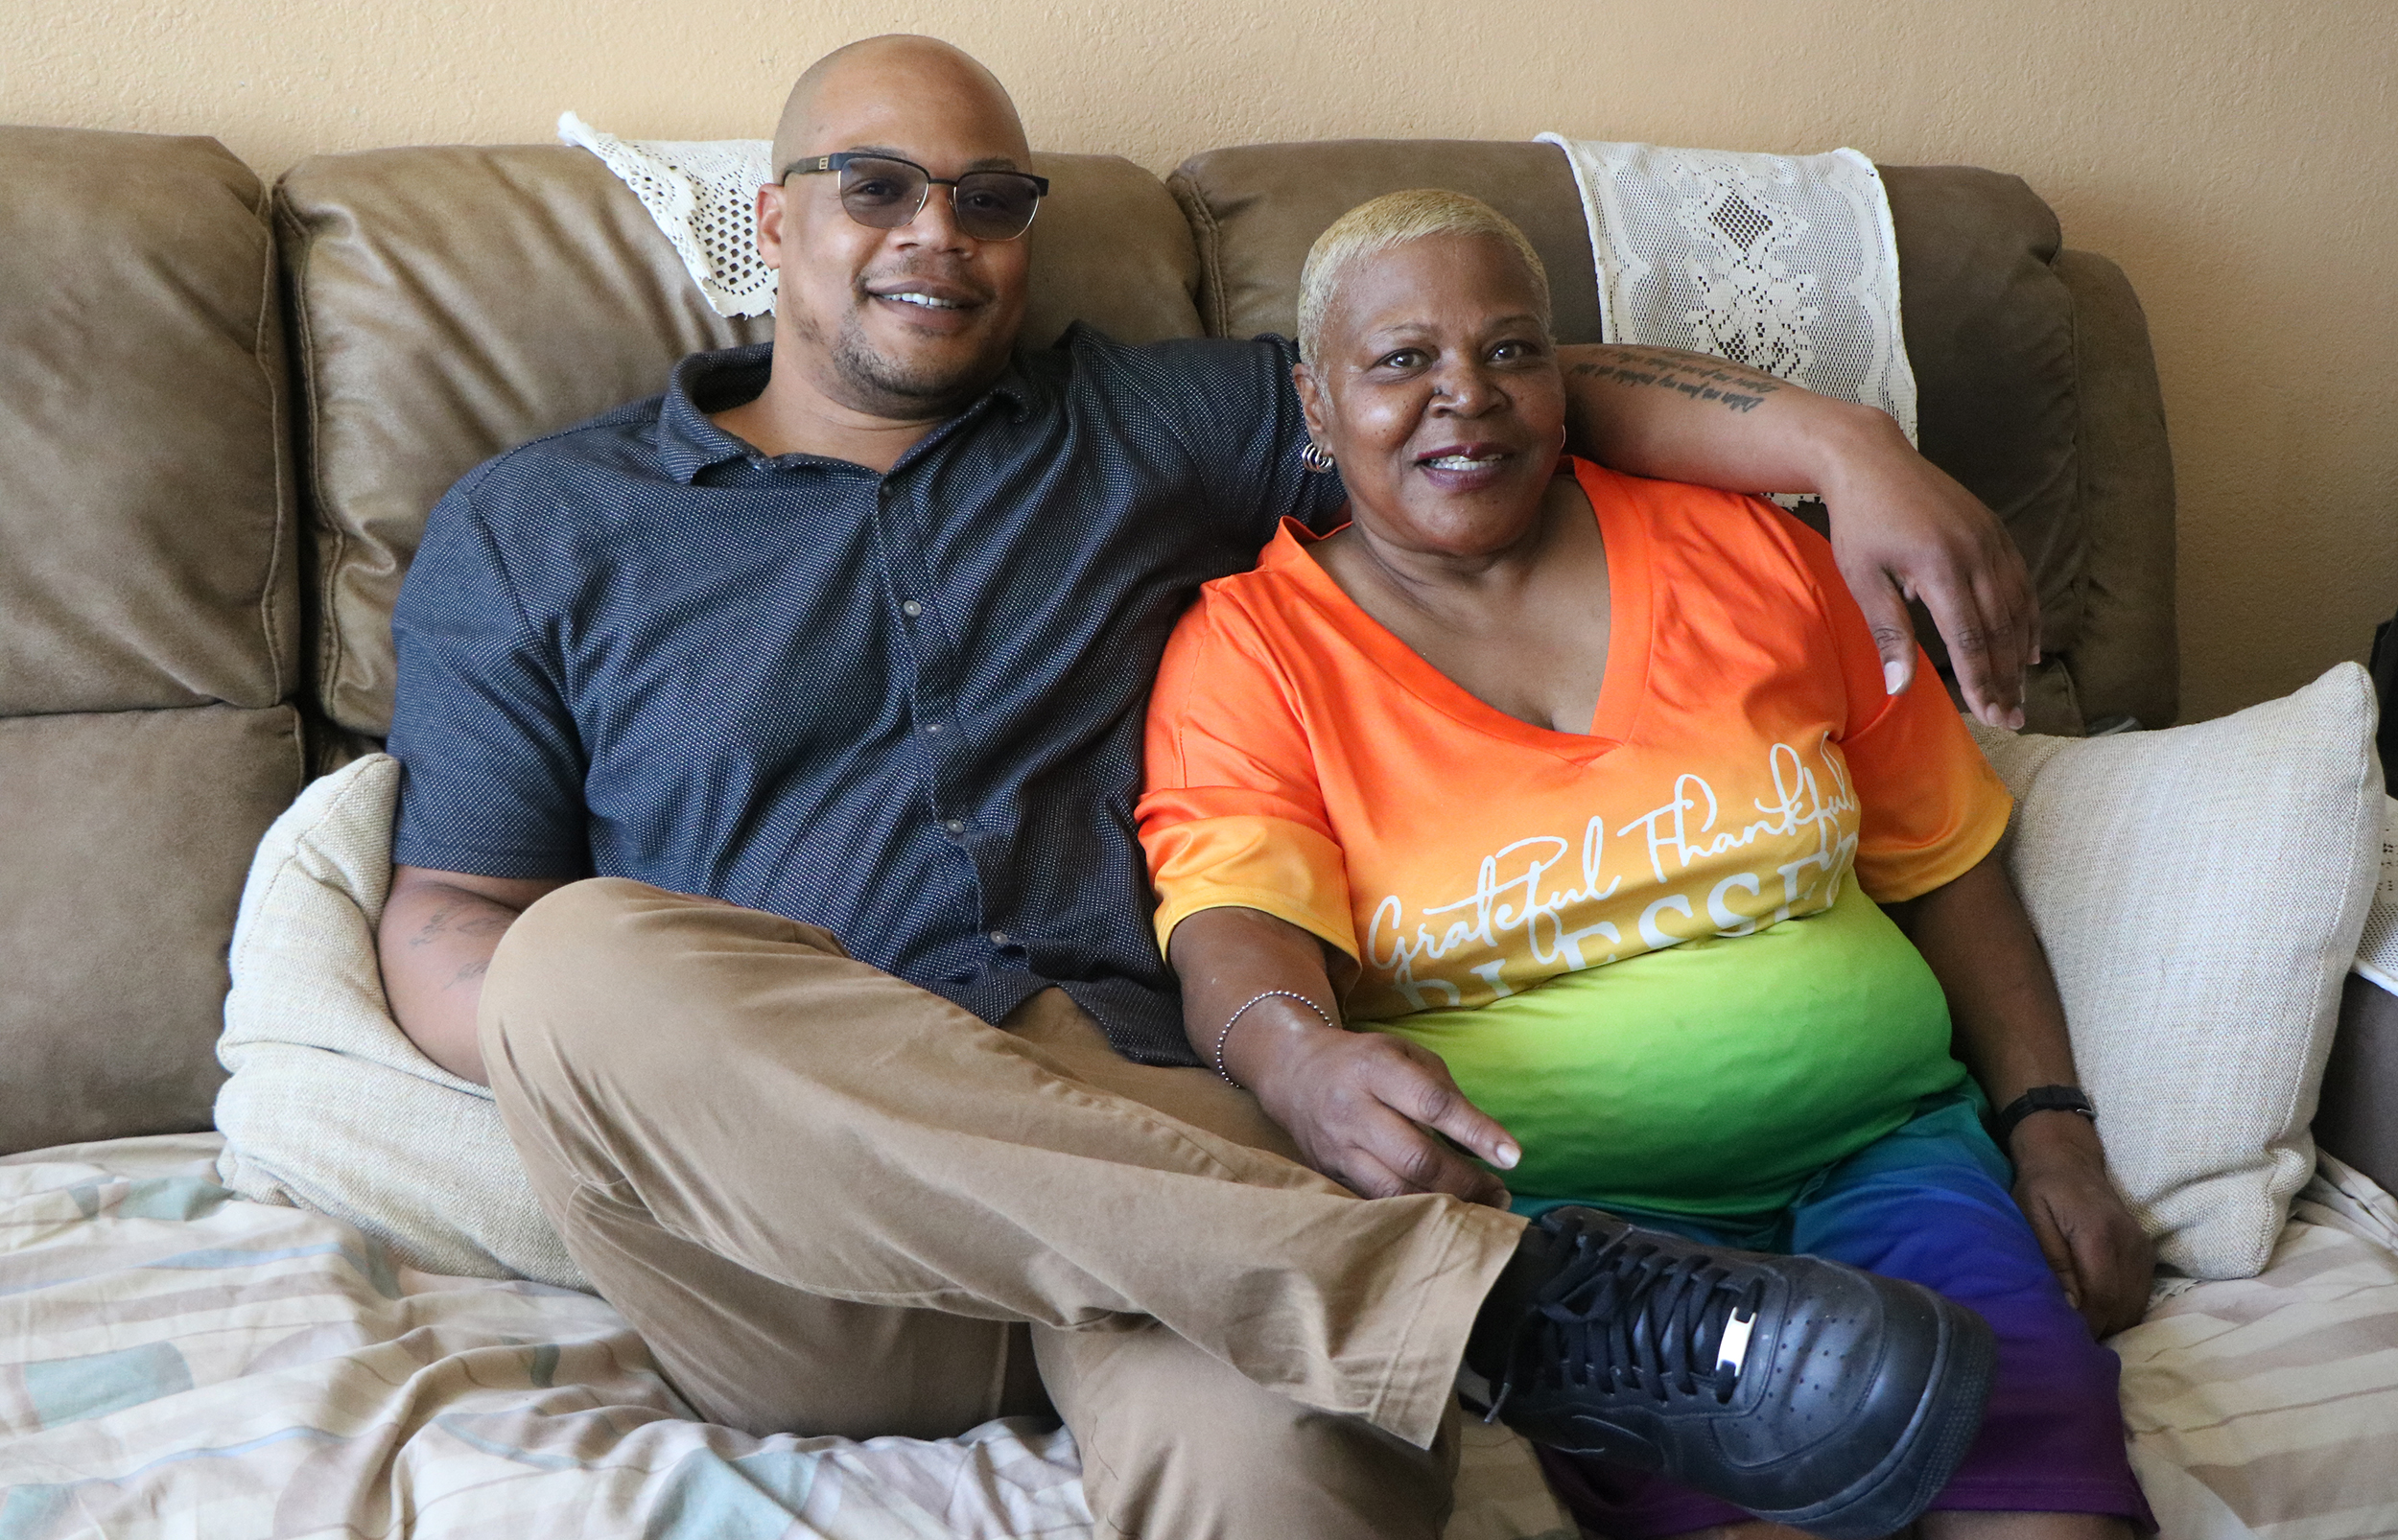 Black man (right) sits on a couch with his arm around his Black mother. The two are smiling.